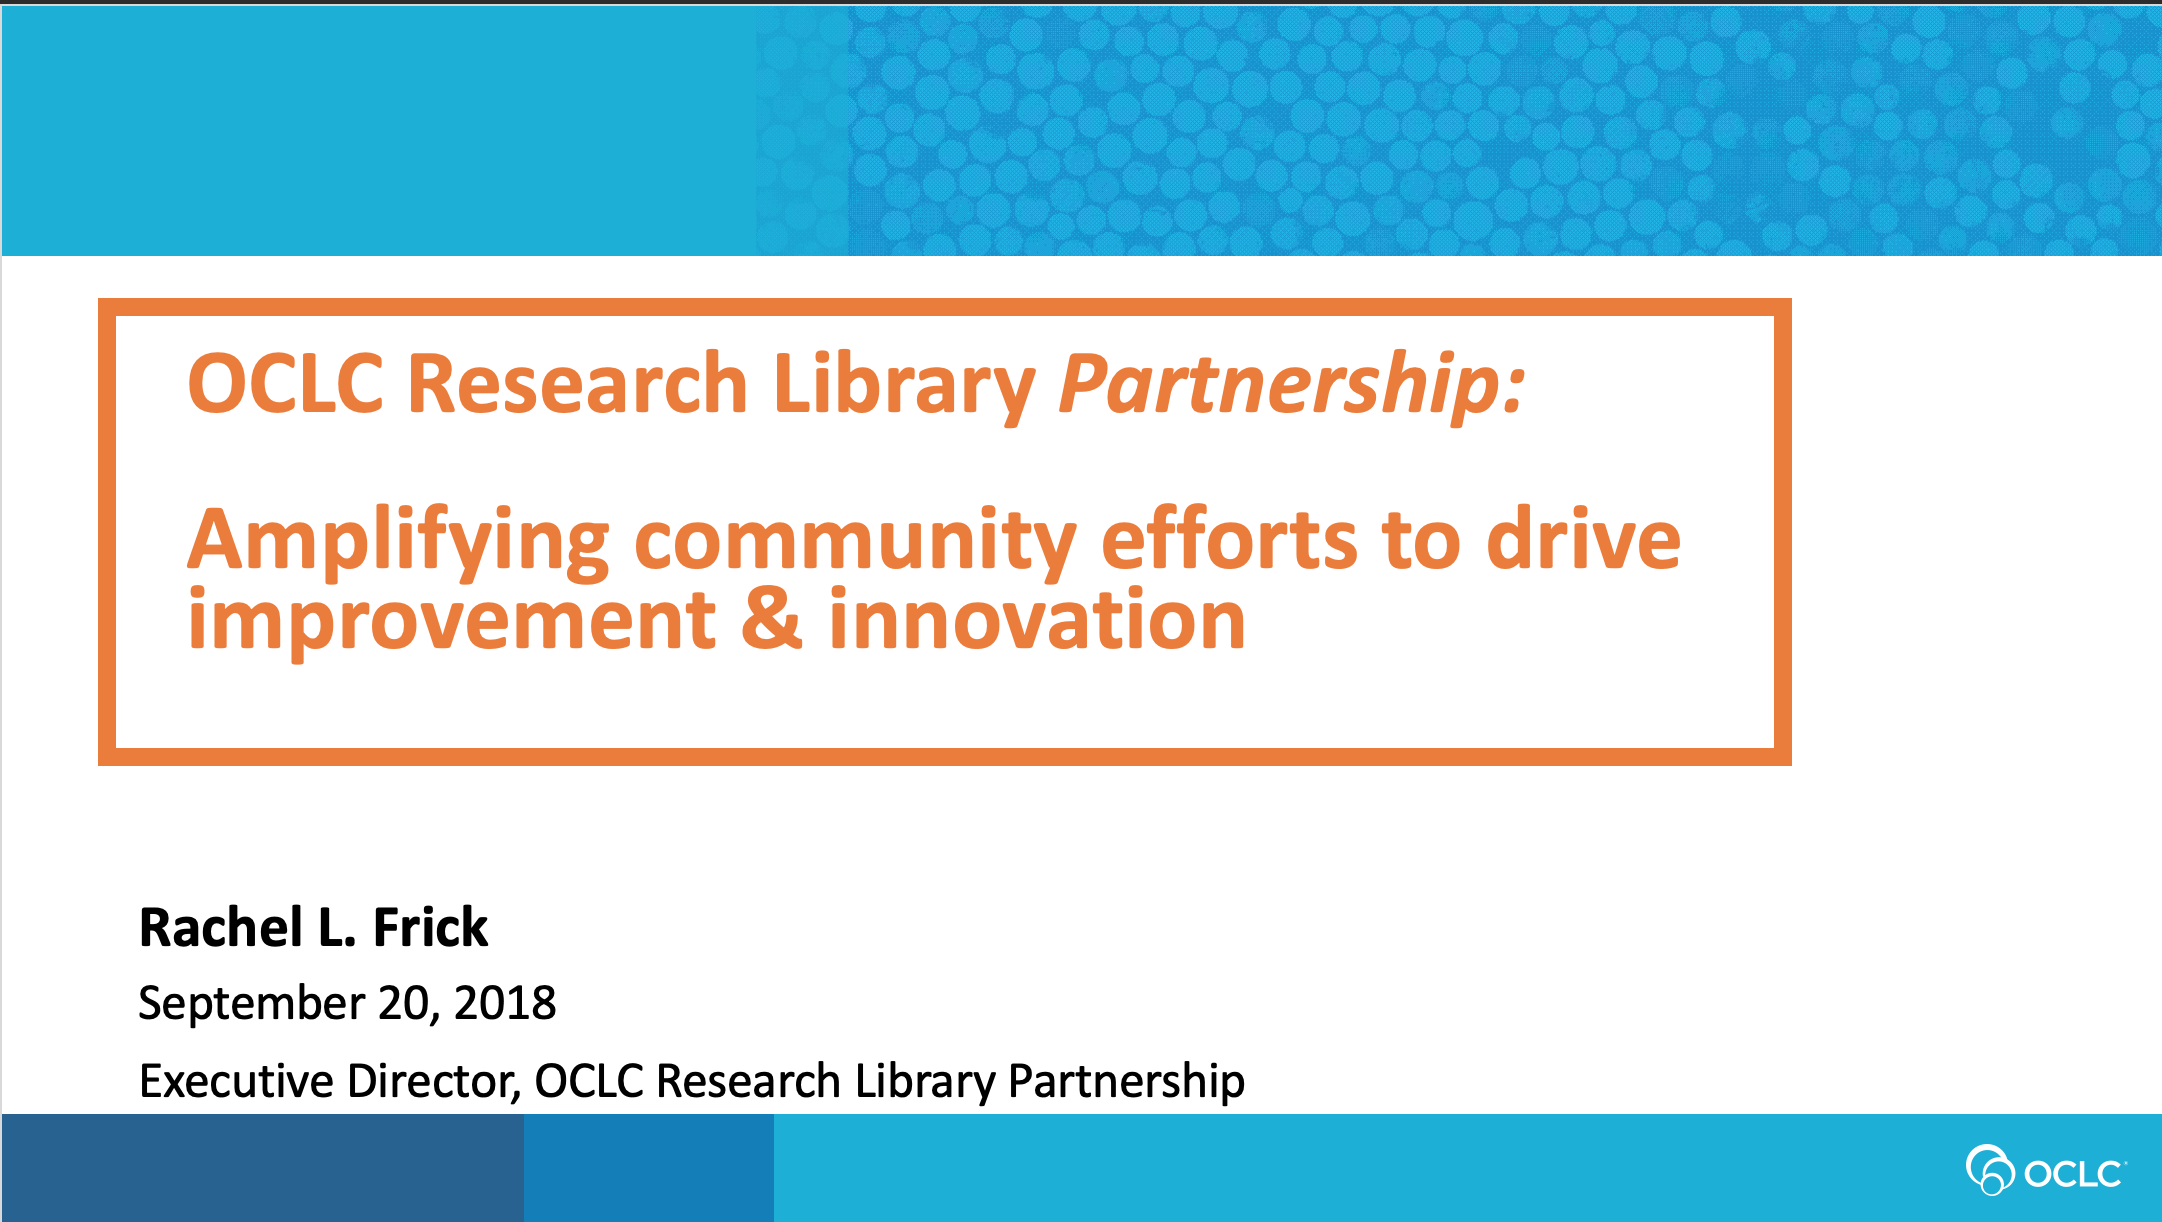 OCLC Research Library Partnership Update from the Executive Director (video)